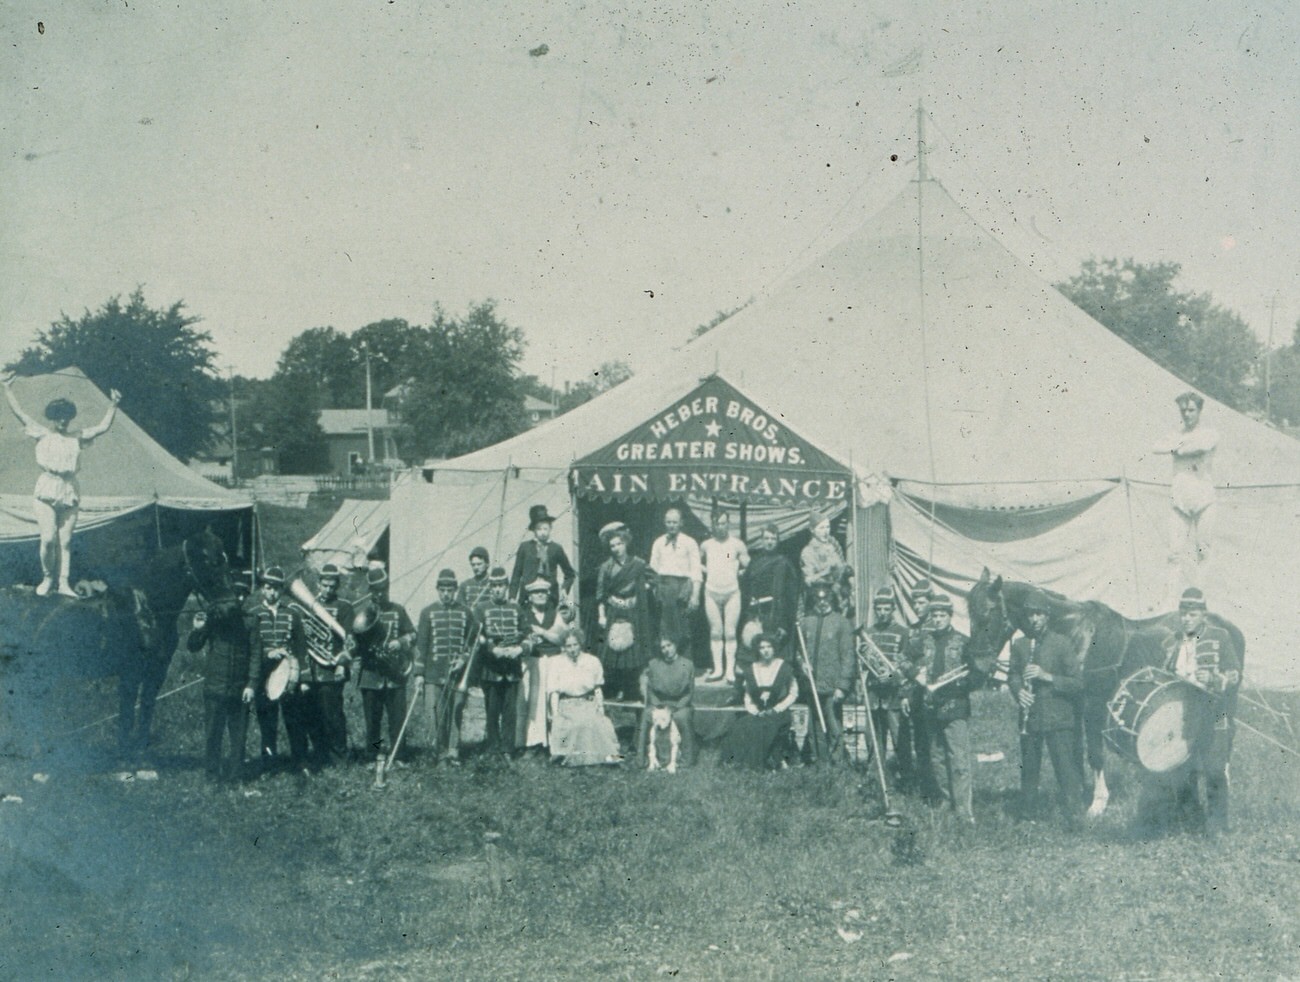 Heber Brother's Greater Show Circus tent with band and performers, including the Heber family members, 1907.